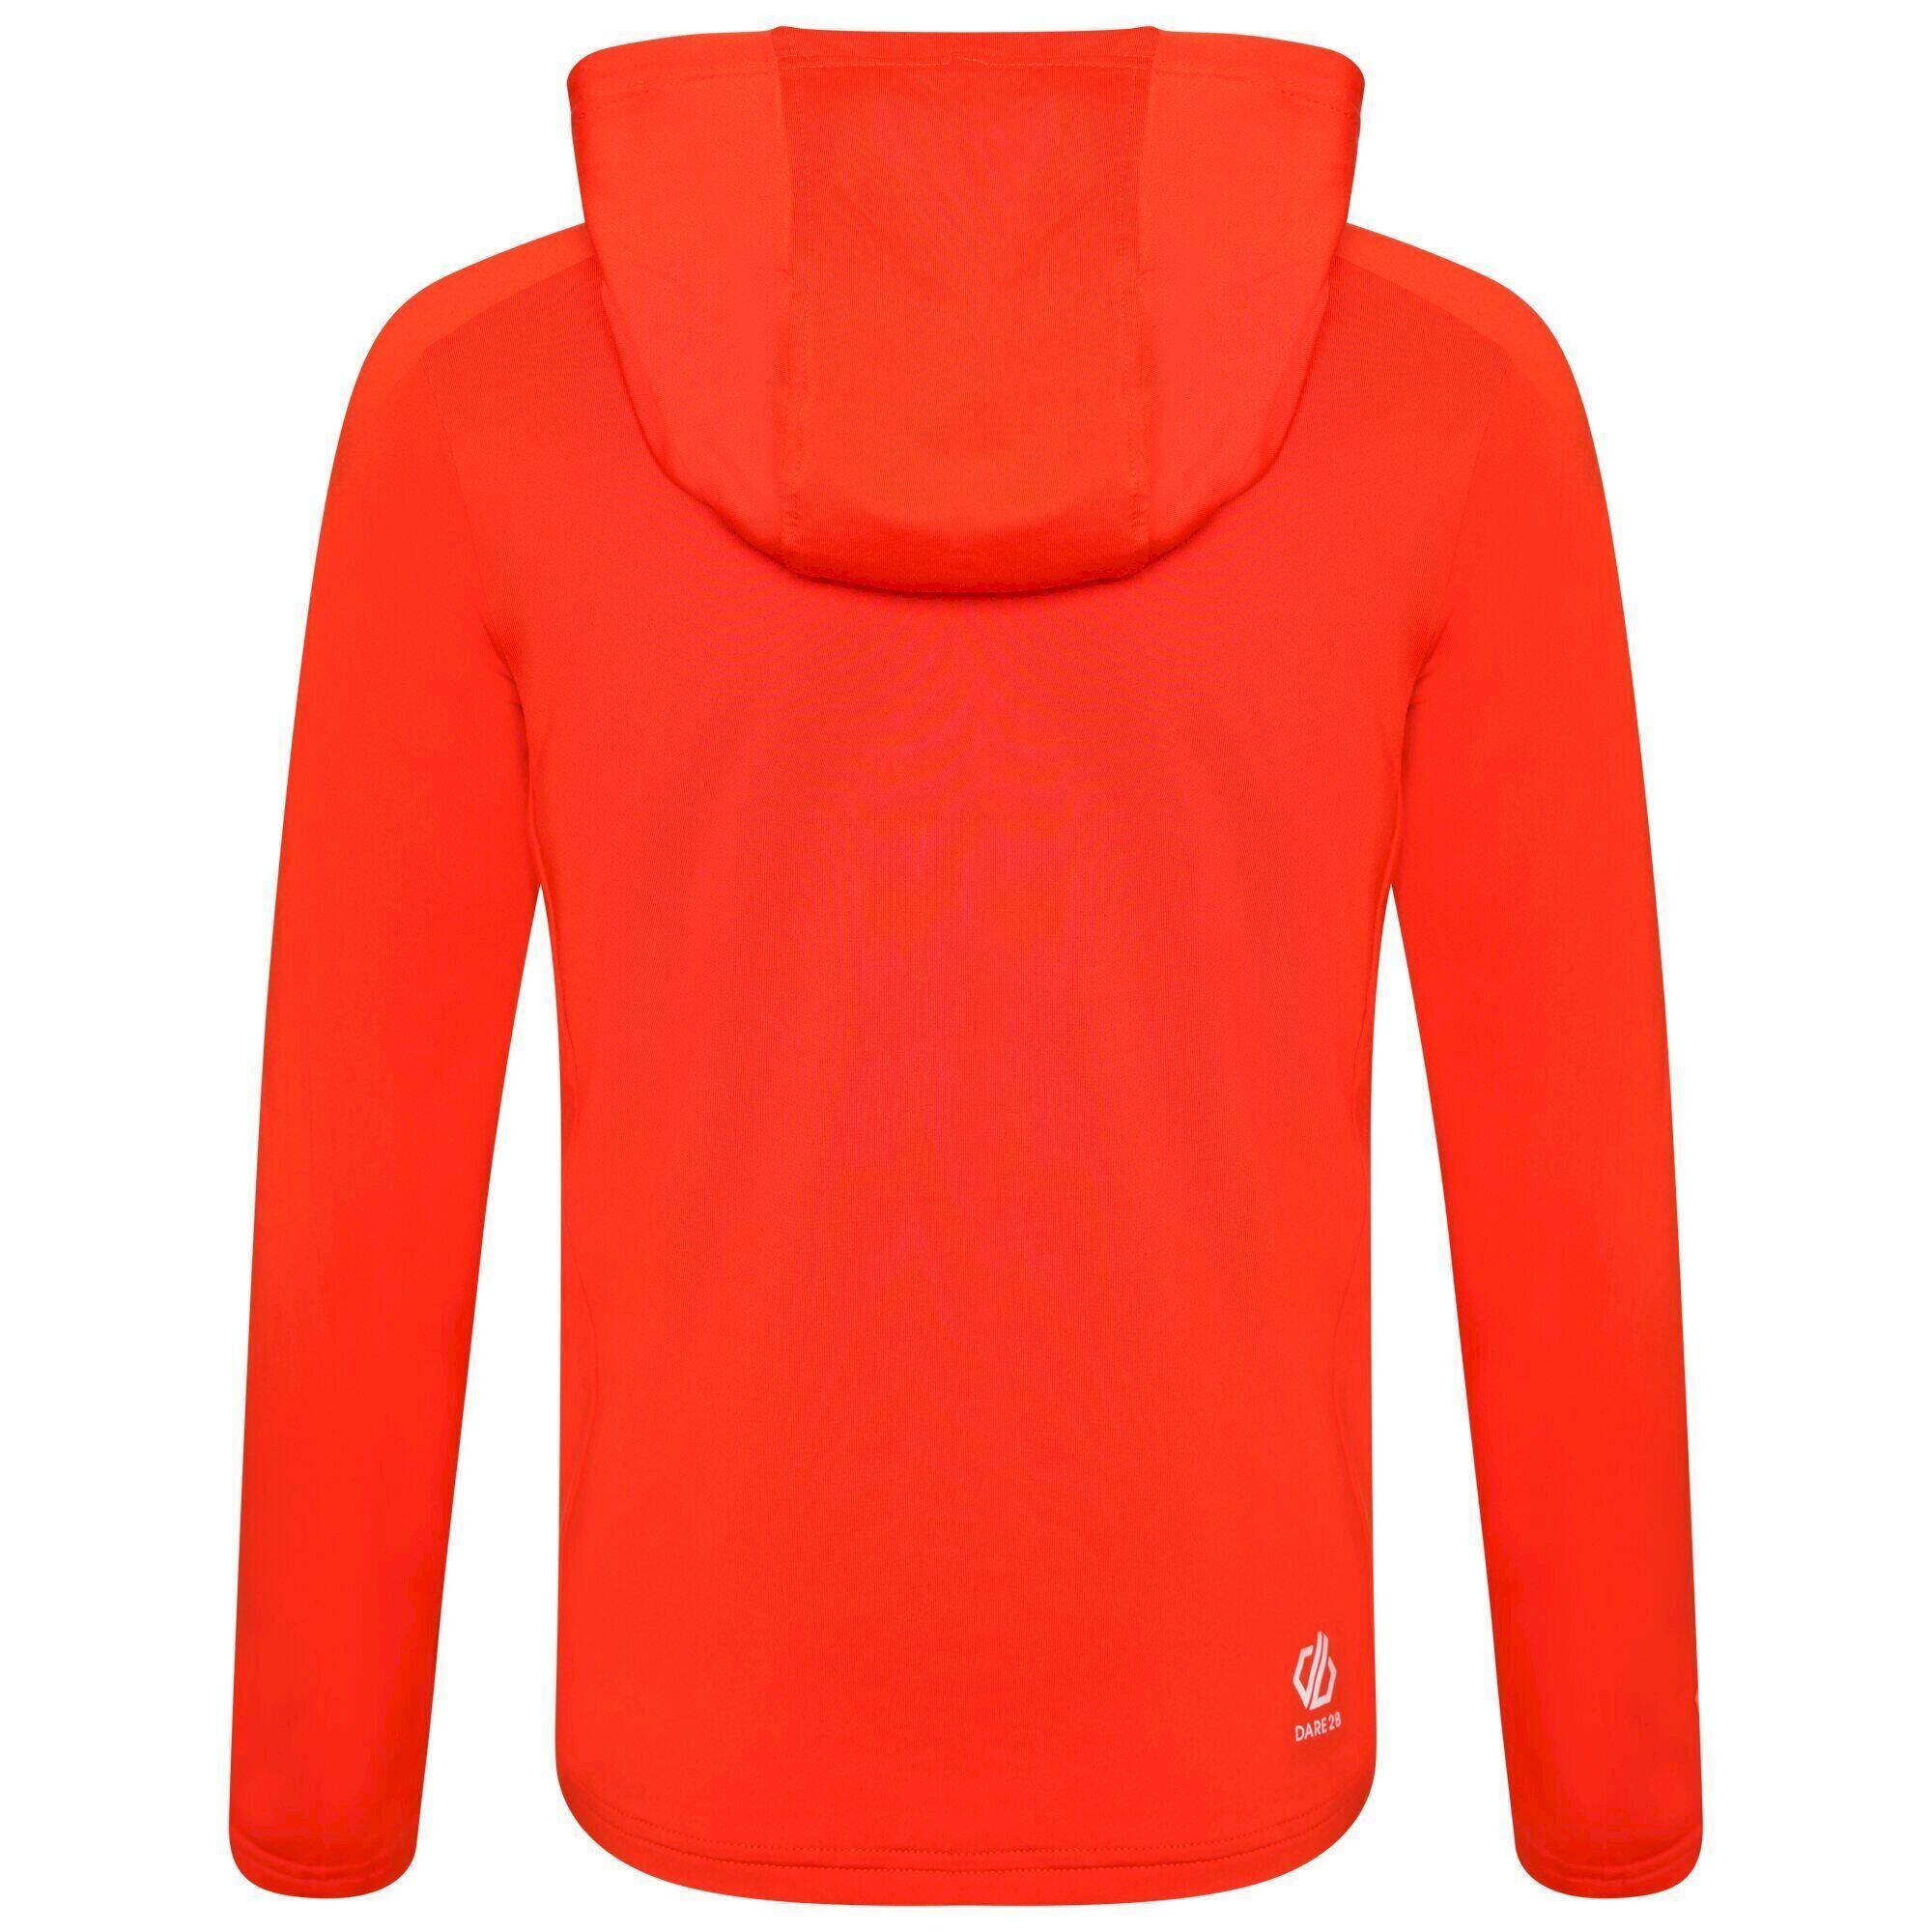 Childrens/Kids Hastily Core Stretch Recycled Midlayer (Bright Salmon) 2/4